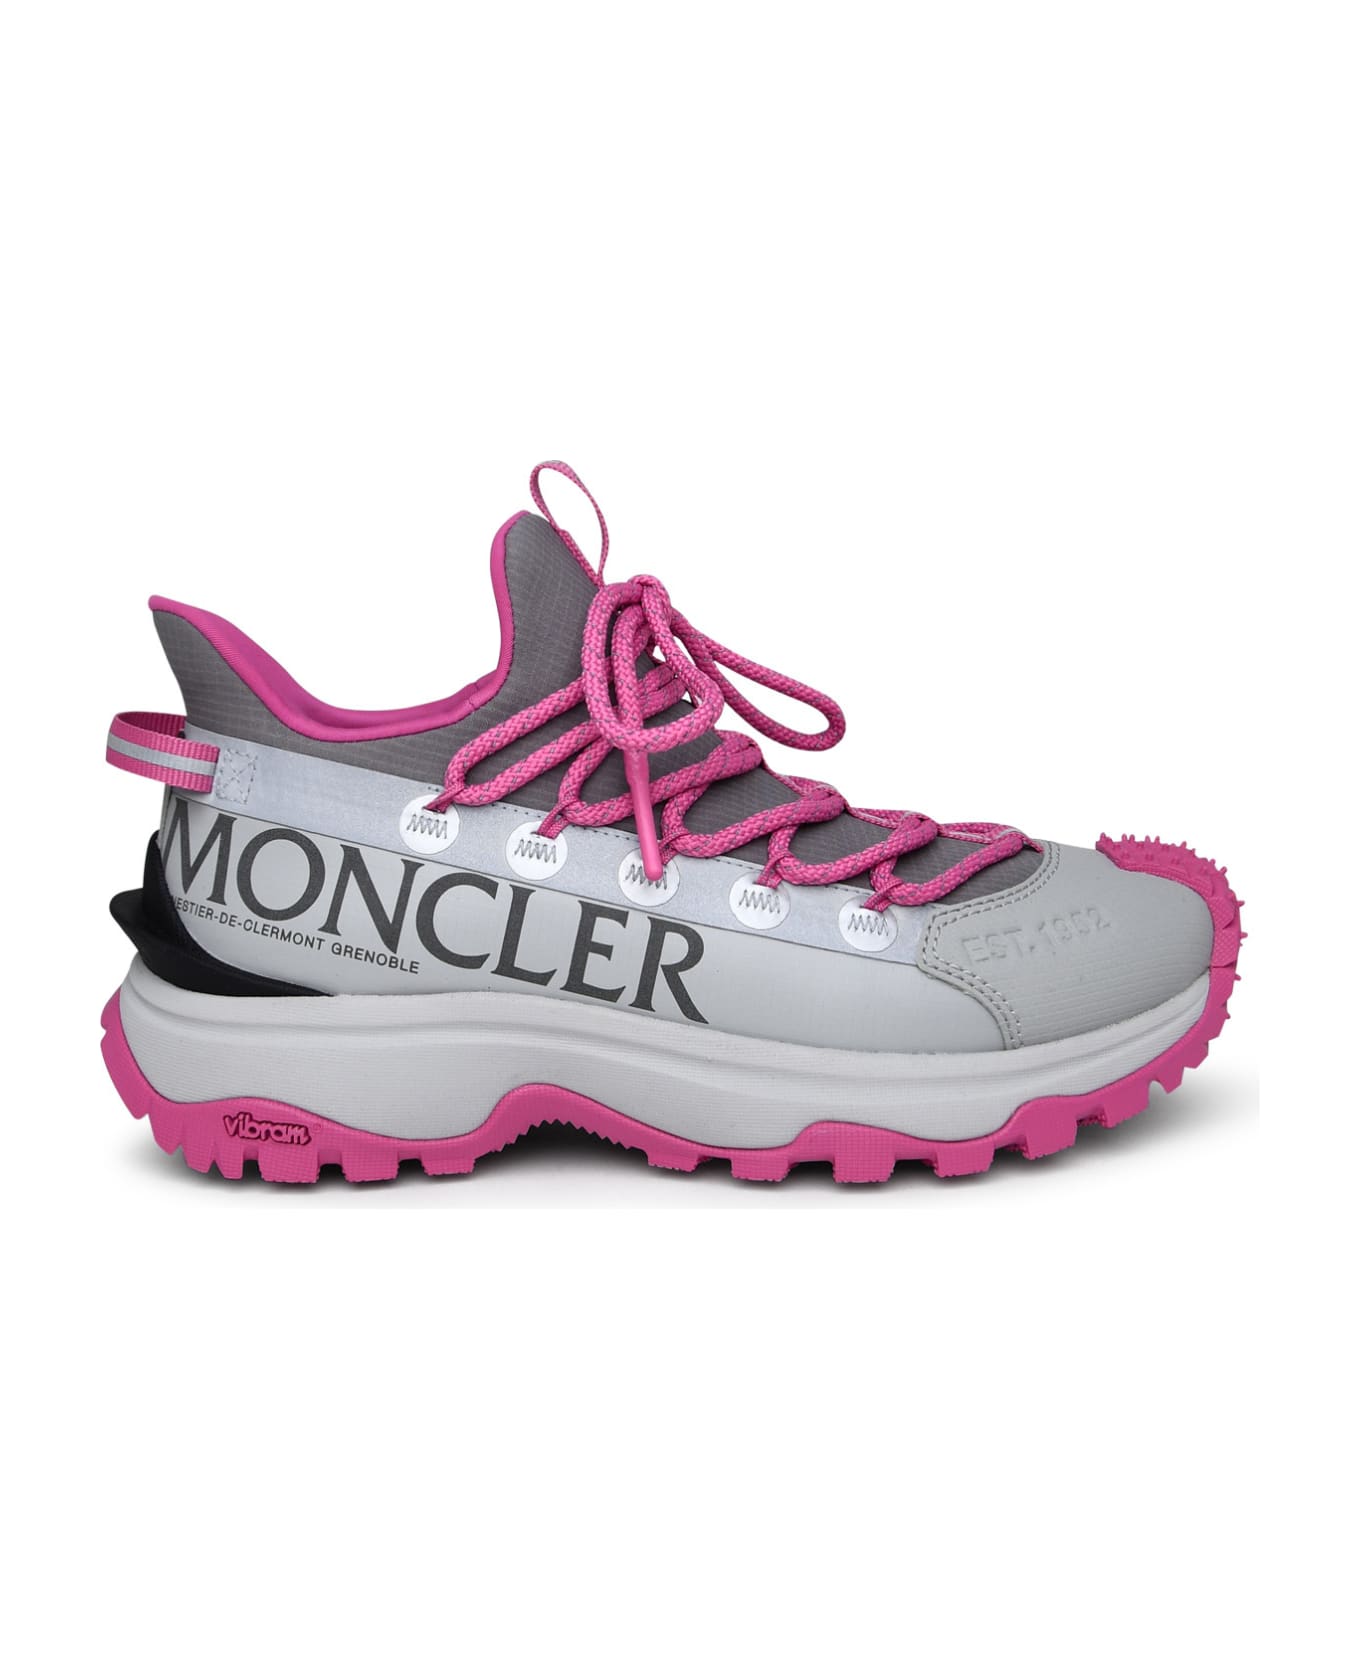 Moncler Trail Grip Sneakers In Gray Polyamide - Grey スニーカー